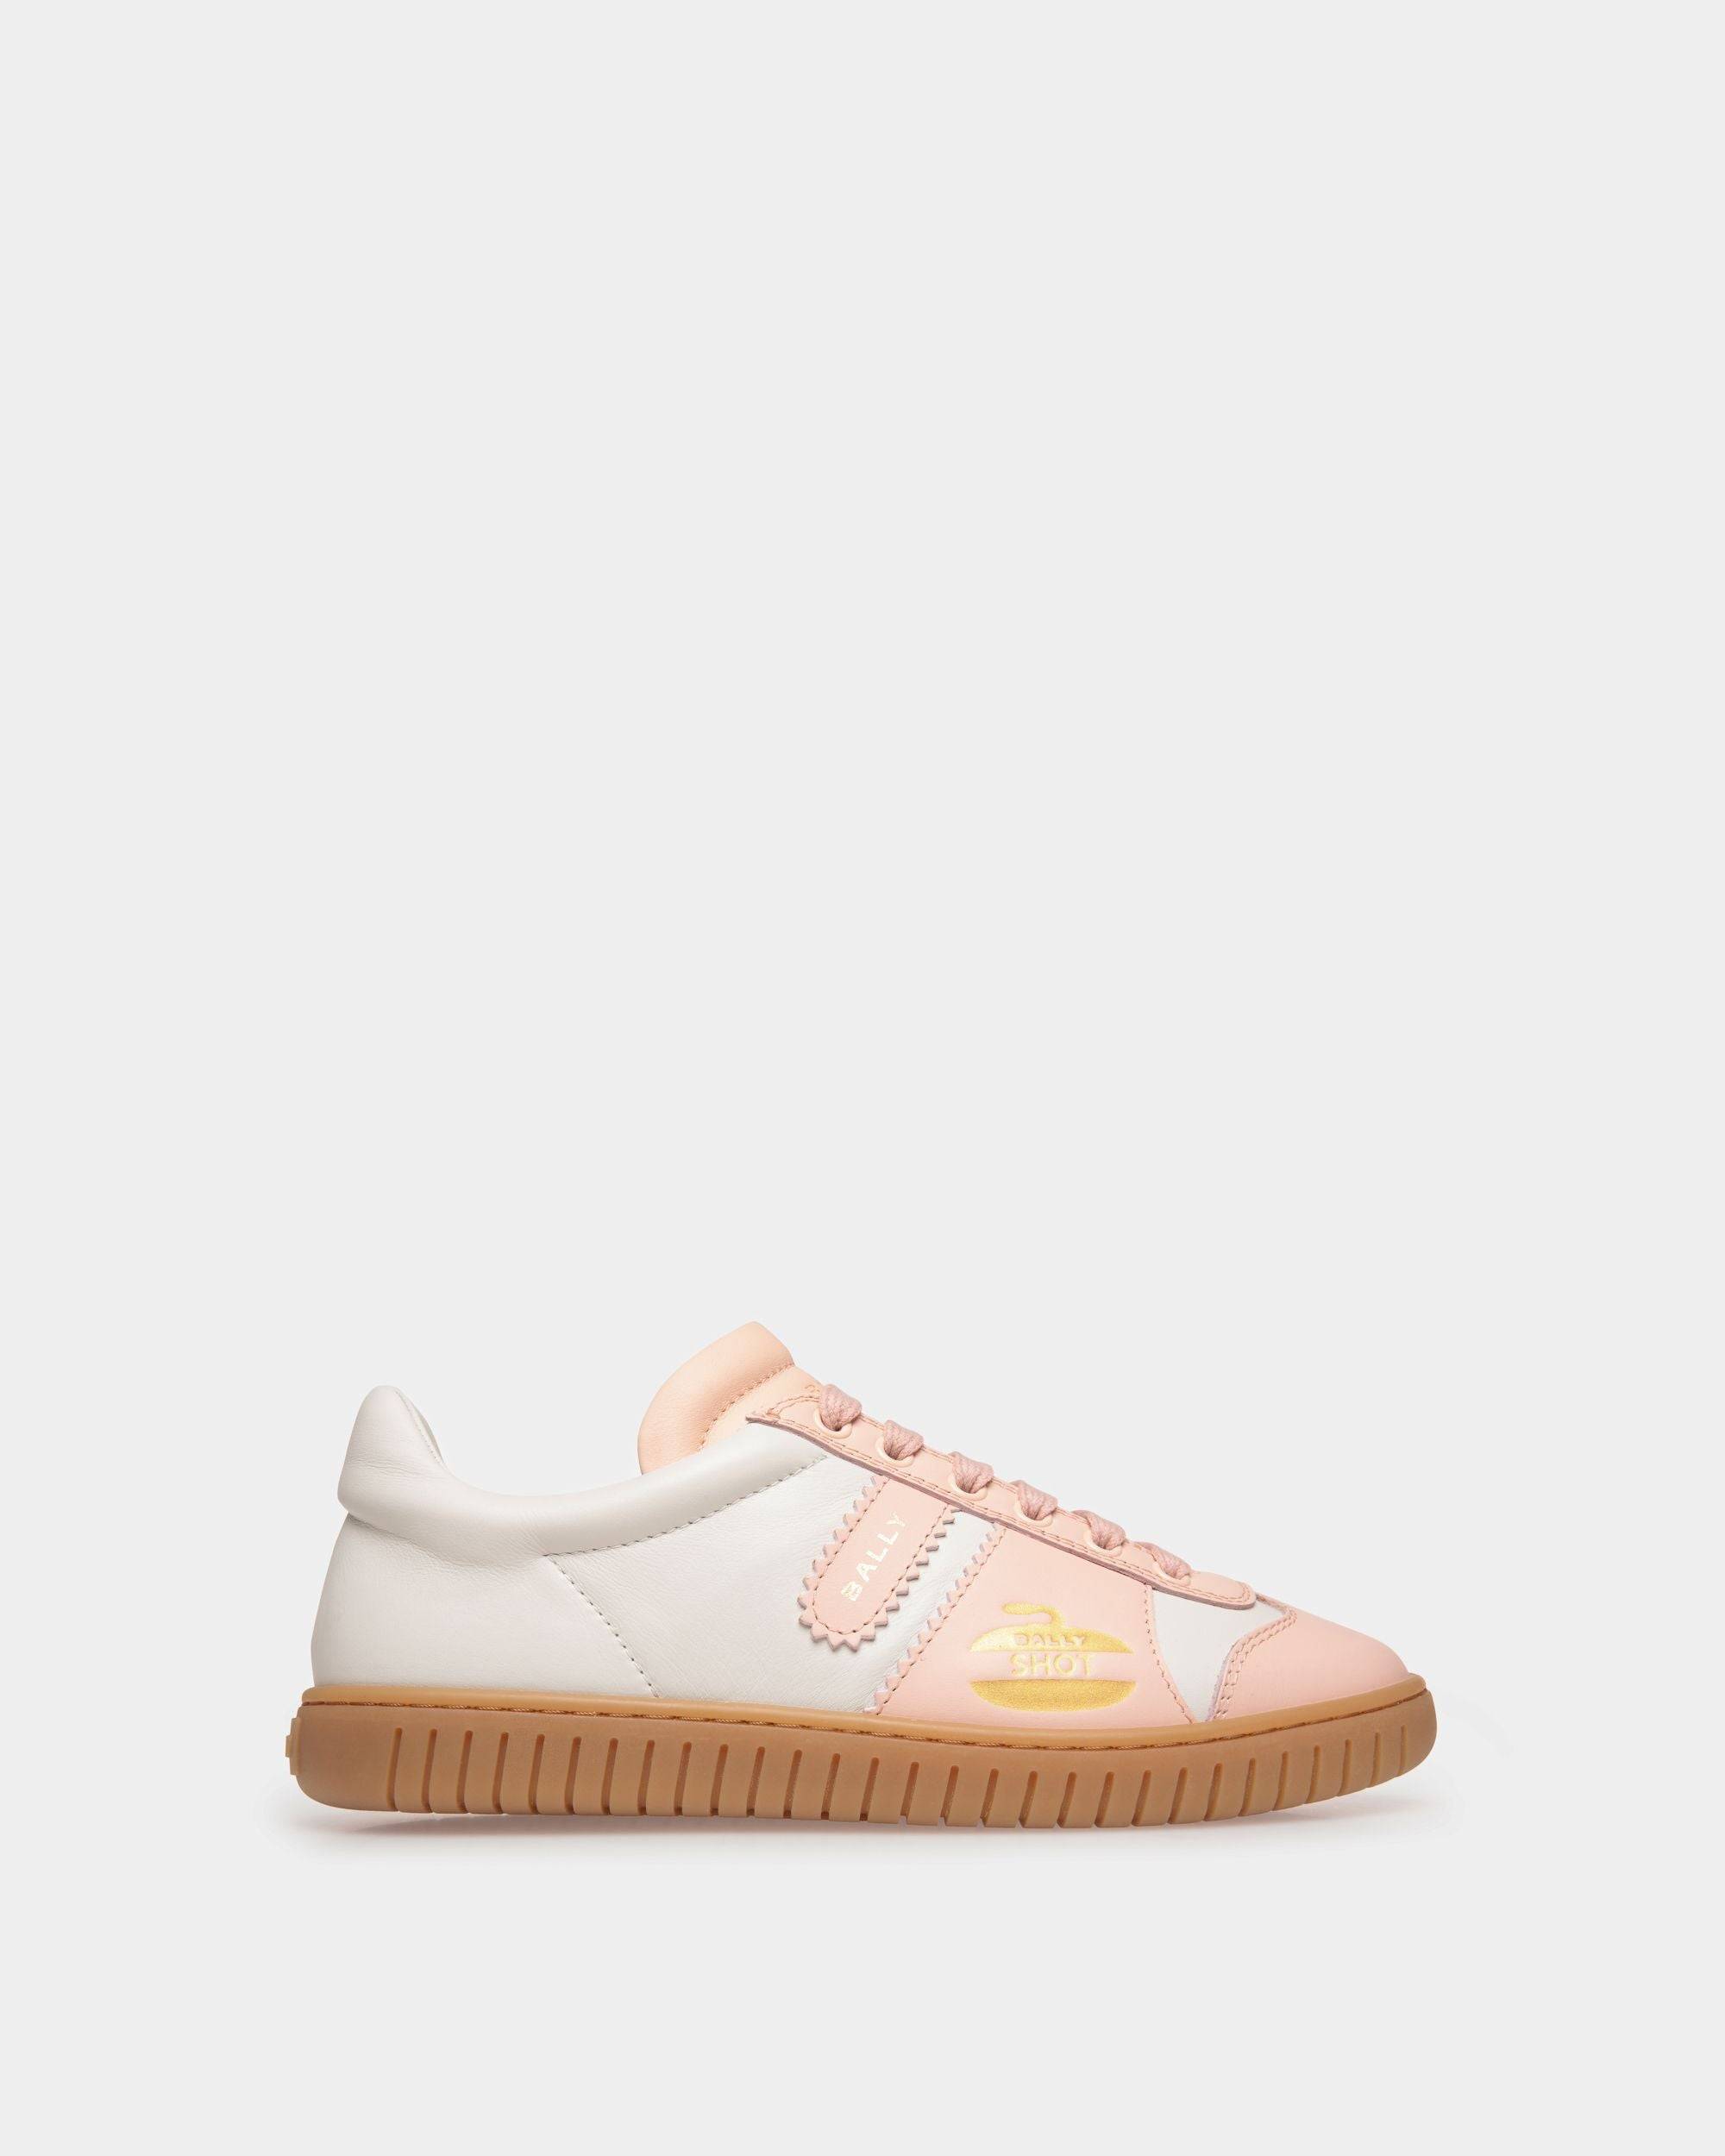 Women's Player Sneaker in White and Baby Pink Leather | Bally | Still Life Side